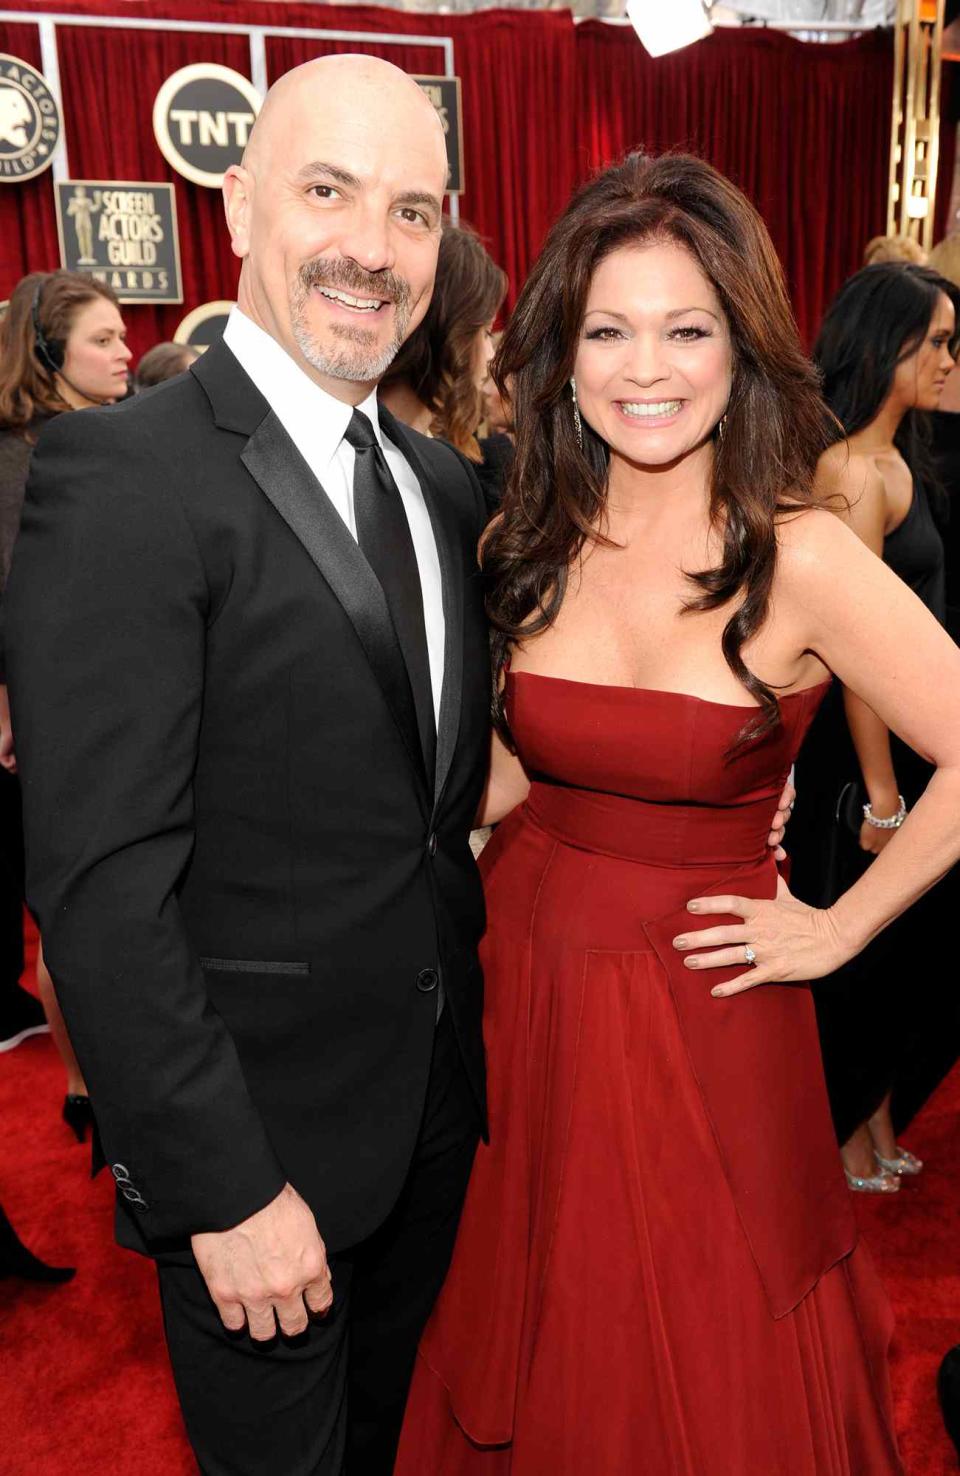 Tom Vitale and Valerie Bertinelli arrives at the TNT/TBS broadcast of the 17th Annual Screen Actors Guild Awards held at The Shrine Auditorium on January 30, 2011 in Los Angeles, California